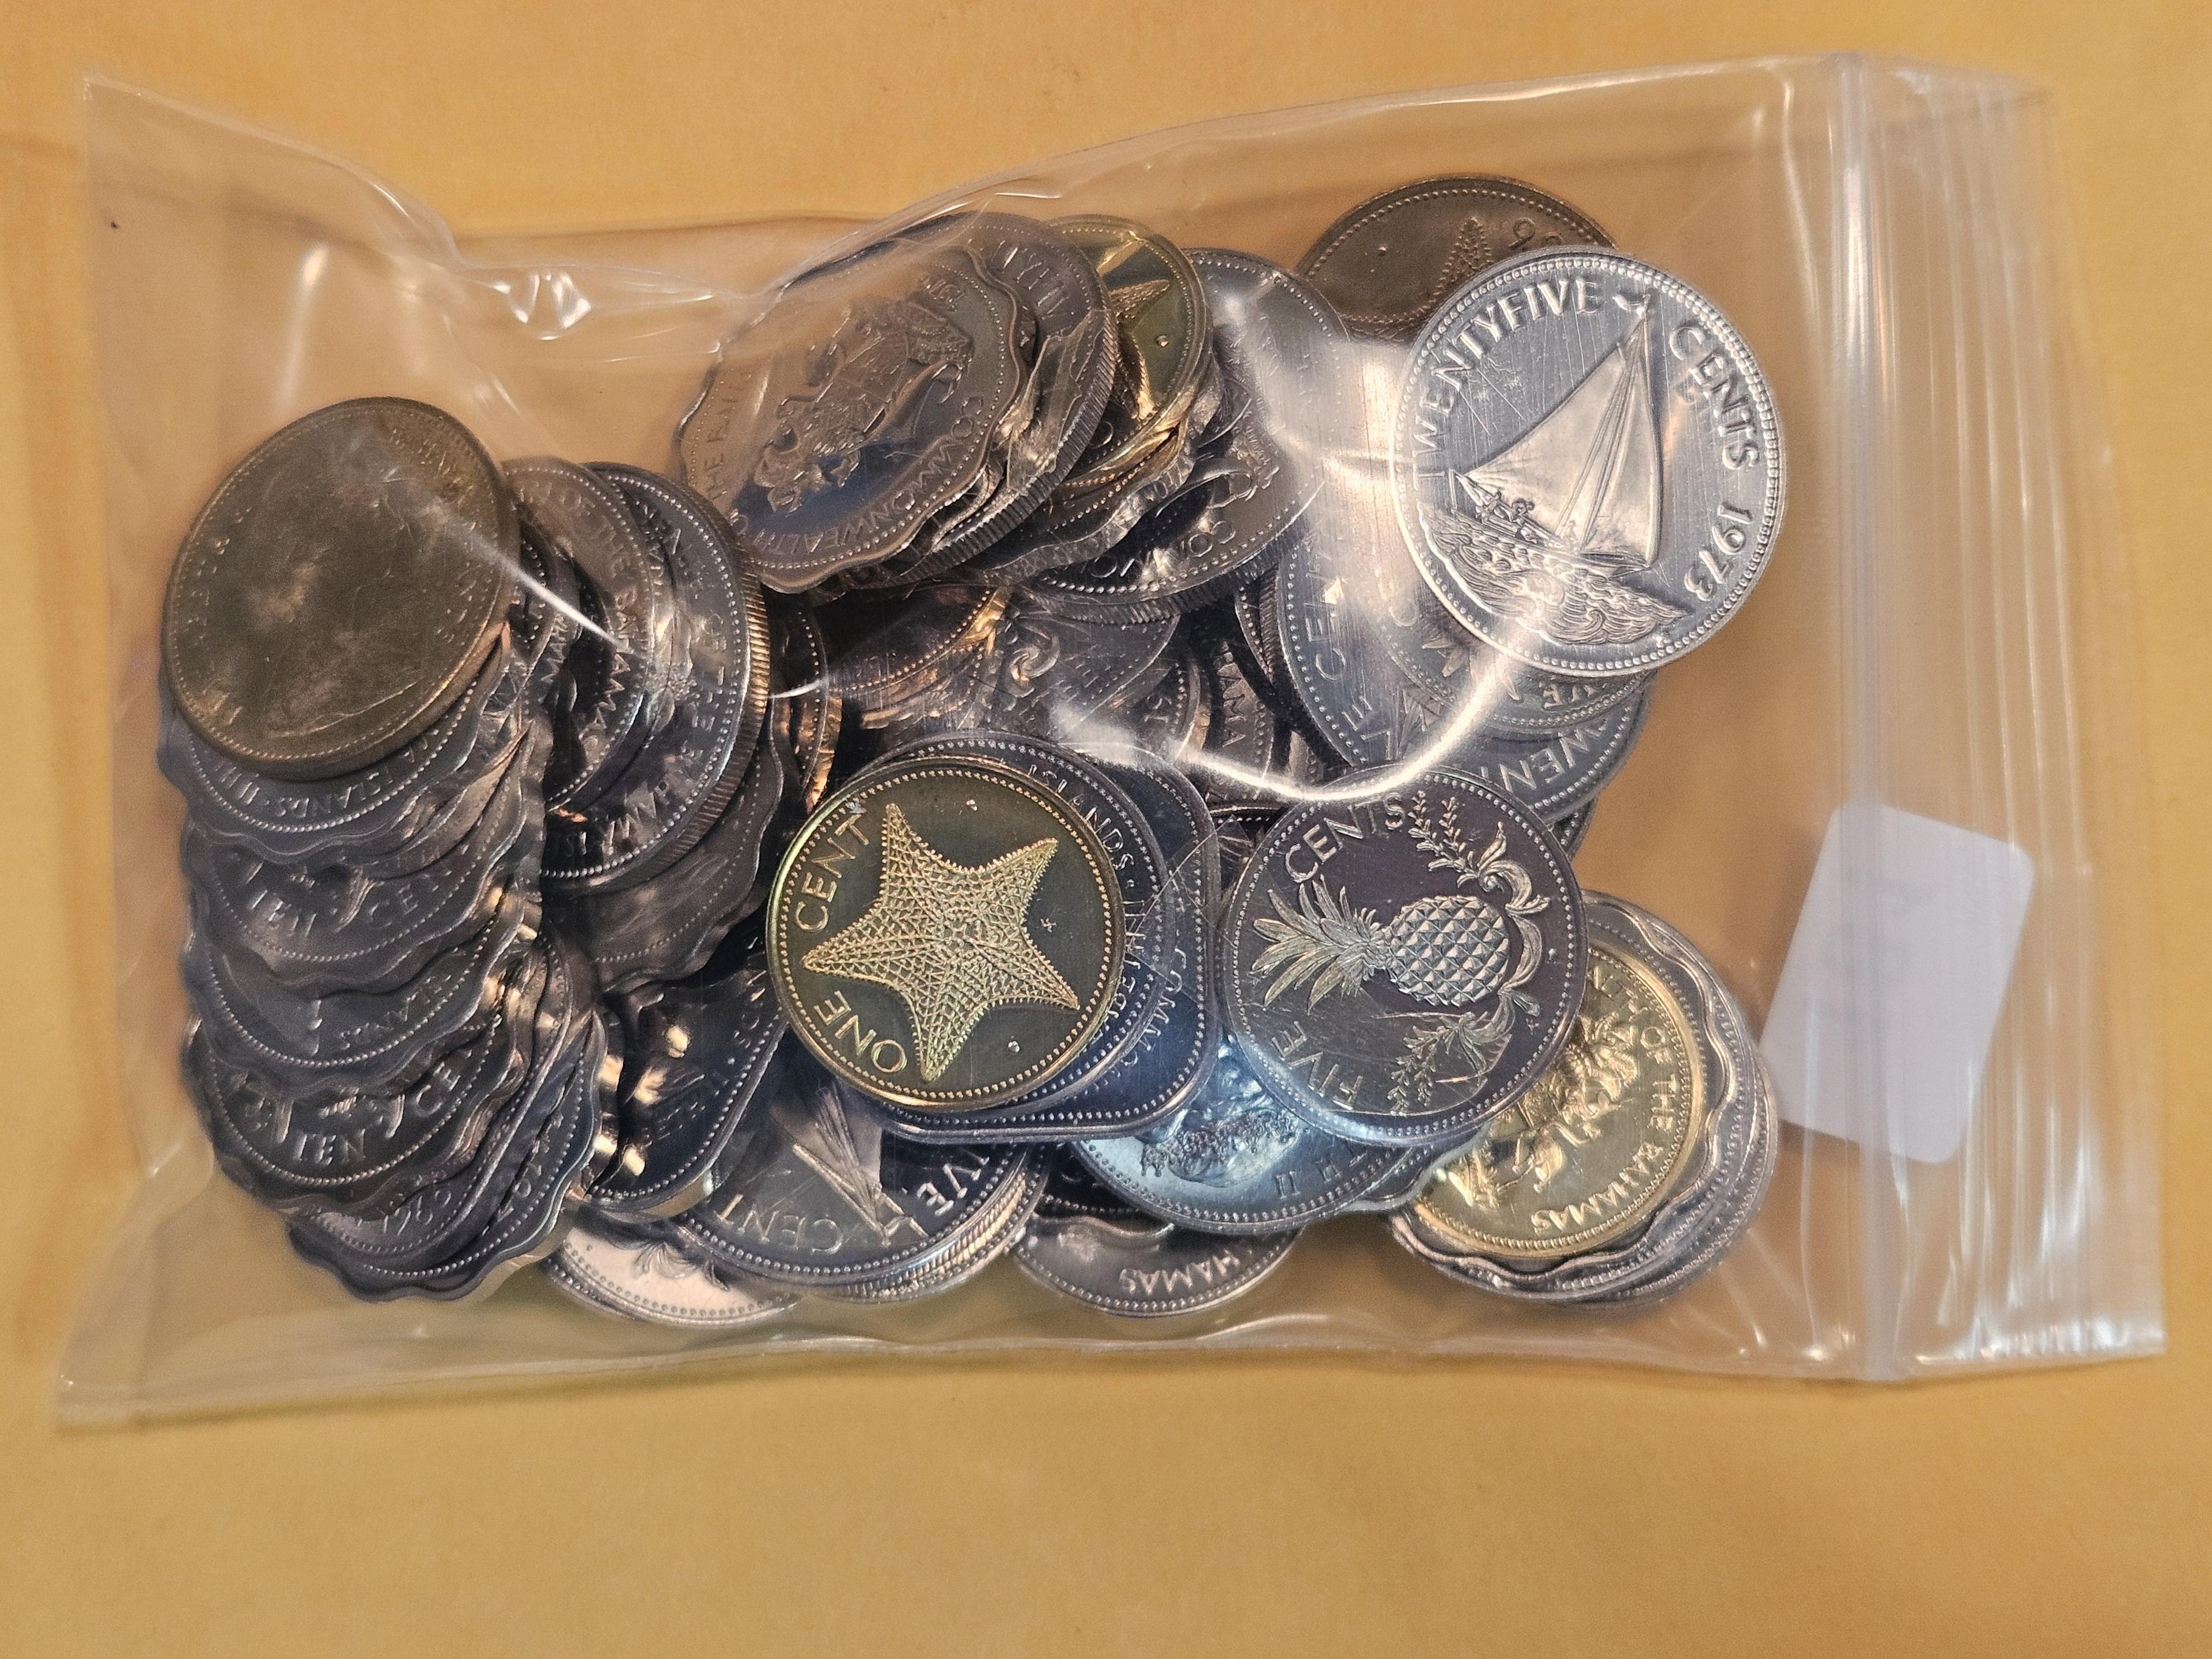 Bag full of Proof Bahamas coins